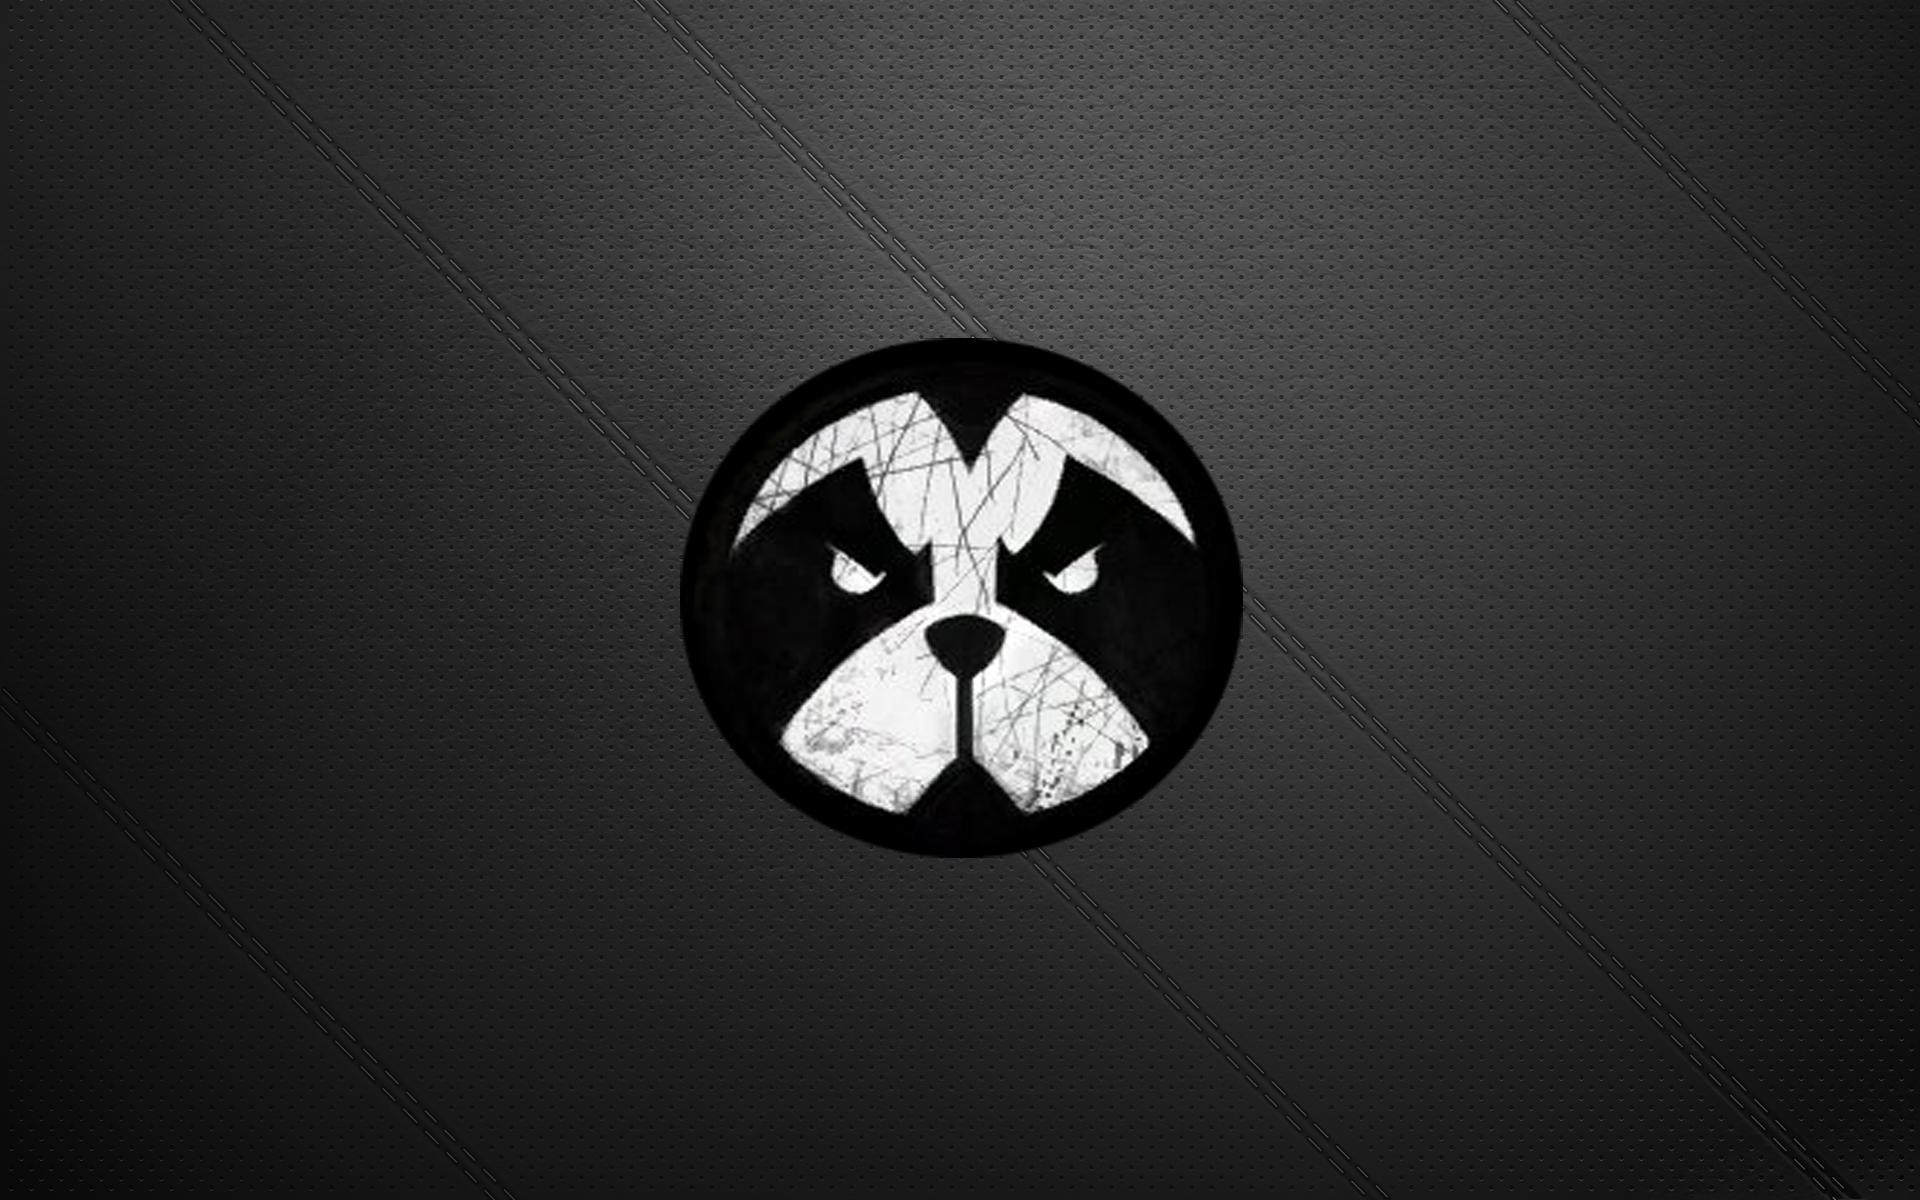 Panda Cool Logo - Wallpaper Request The Starcraft 2 Panda Decal on a Black Background